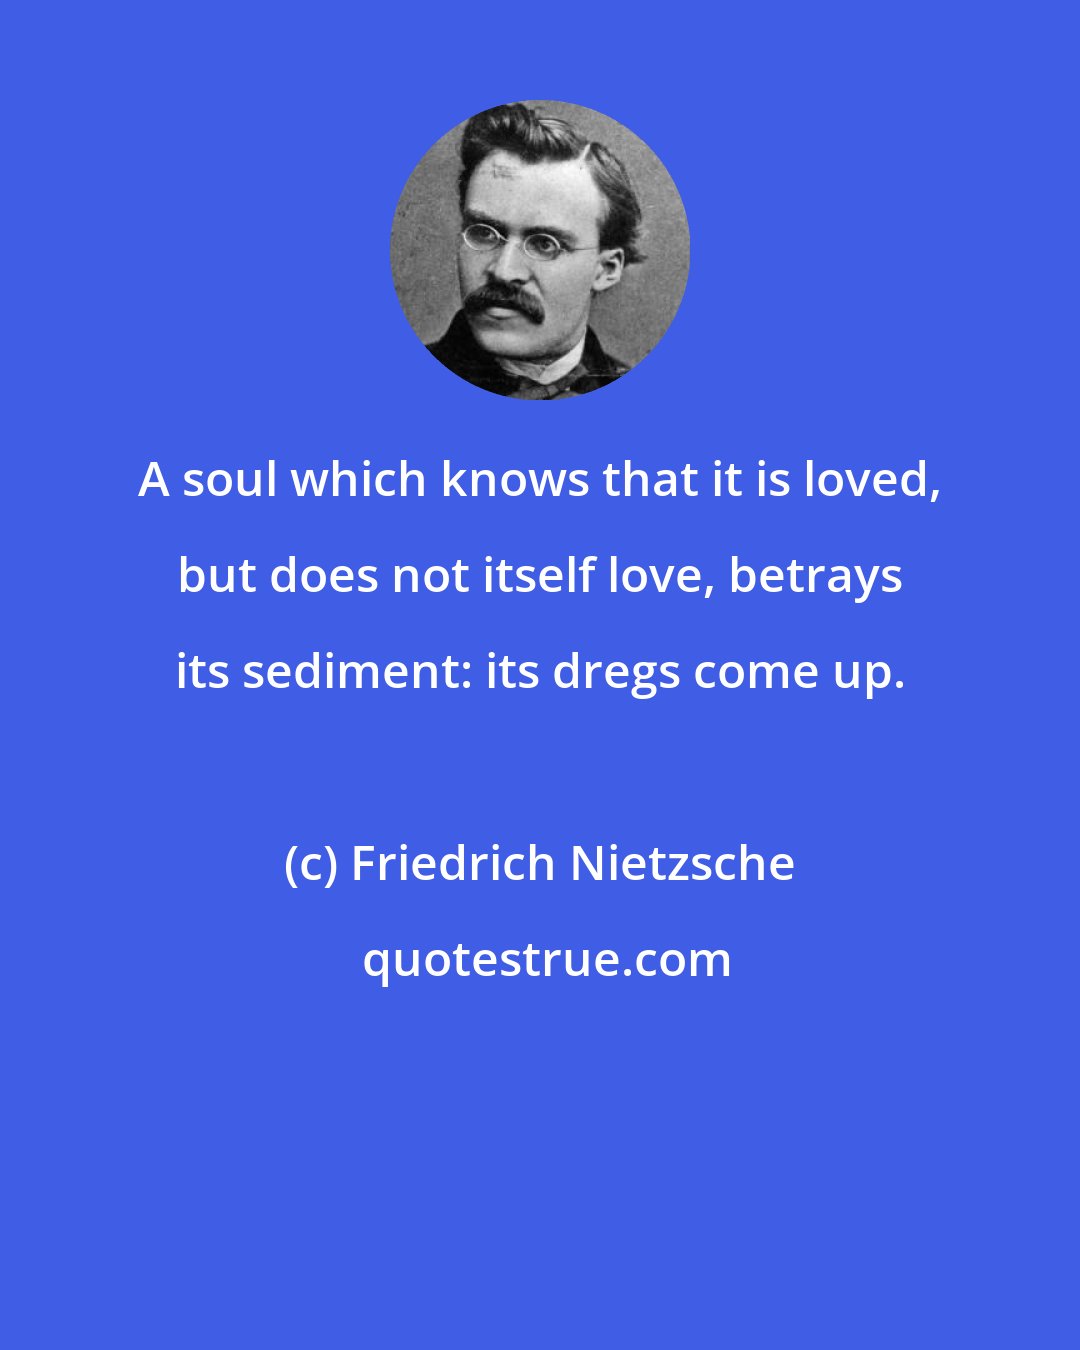 Friedrich Nietzsche: A soul which knows that it is loved, but does not itself love, betrays its sediment: its dregs come up.